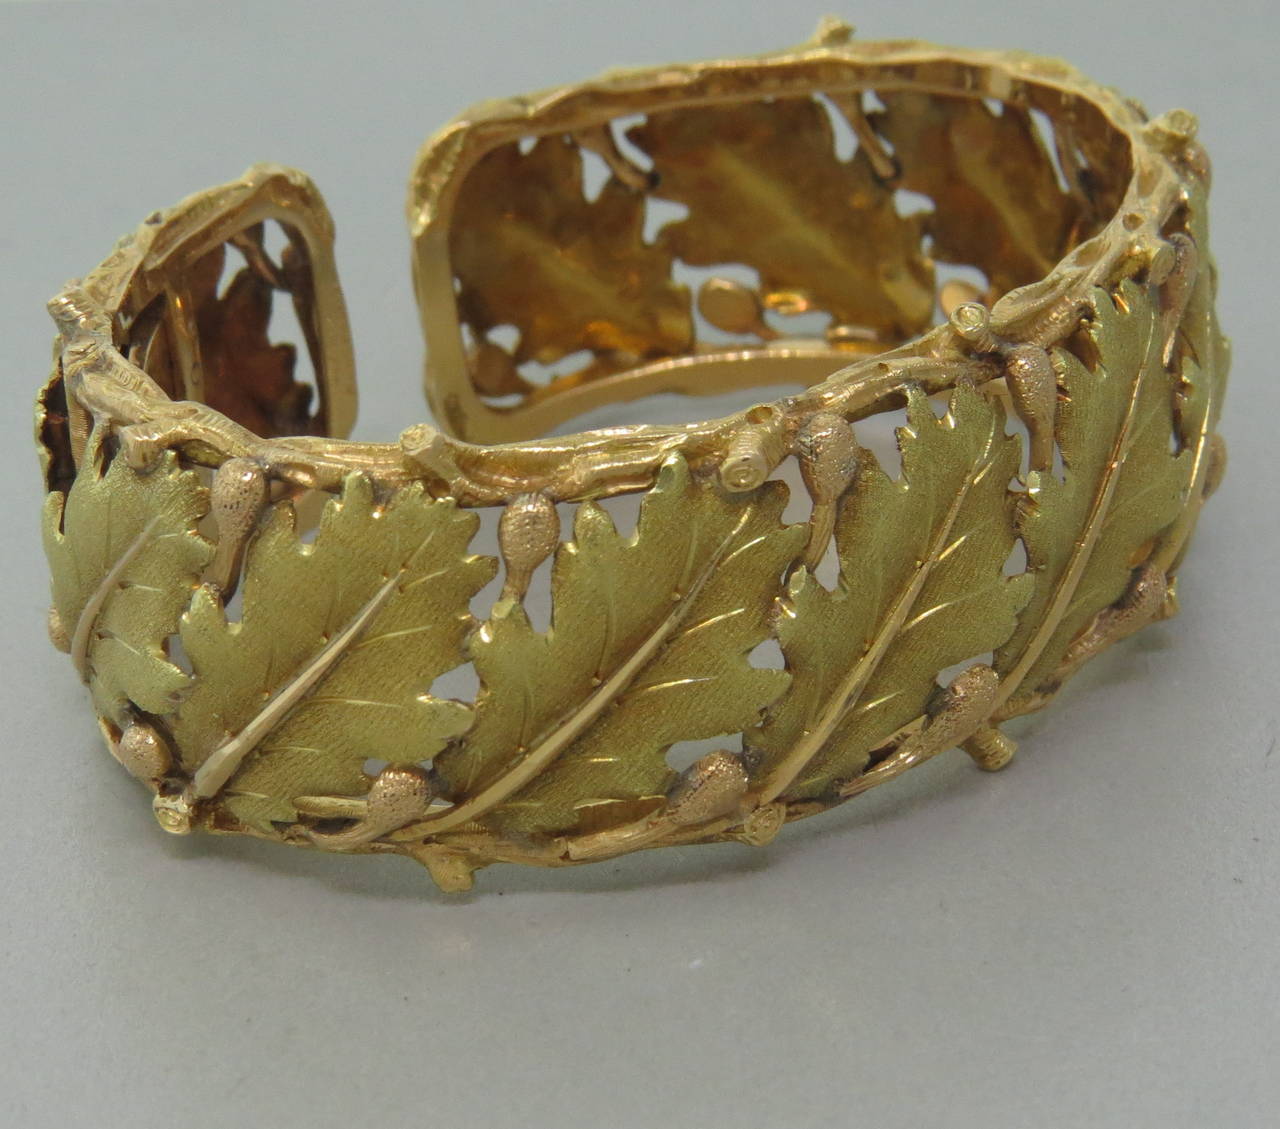 Buccellati 18k gold cuff bracelet with hinged closure and beautiful leaf motif design. Will comfortably fit up to 6 1/2